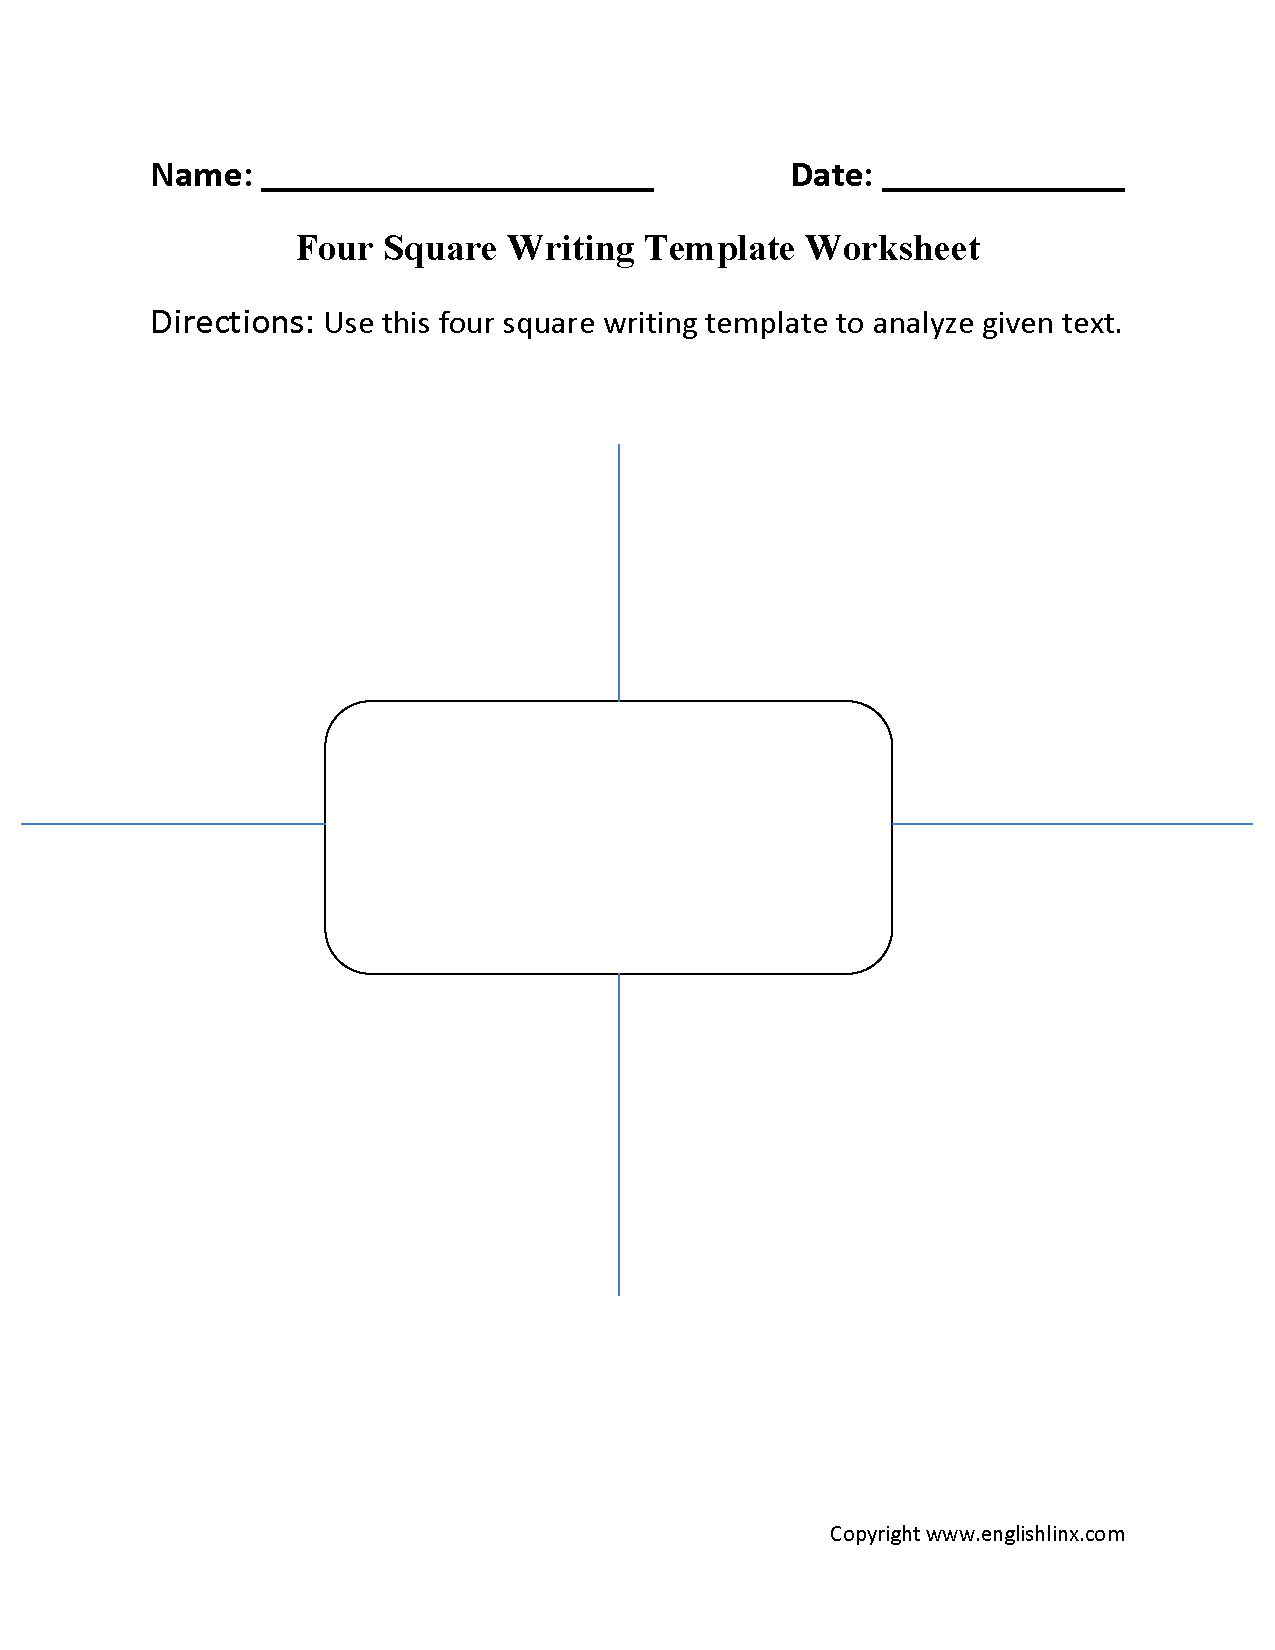 Writing Template Worksheets | Four Square Writing Template Regarding Blank Four Square Writing Template